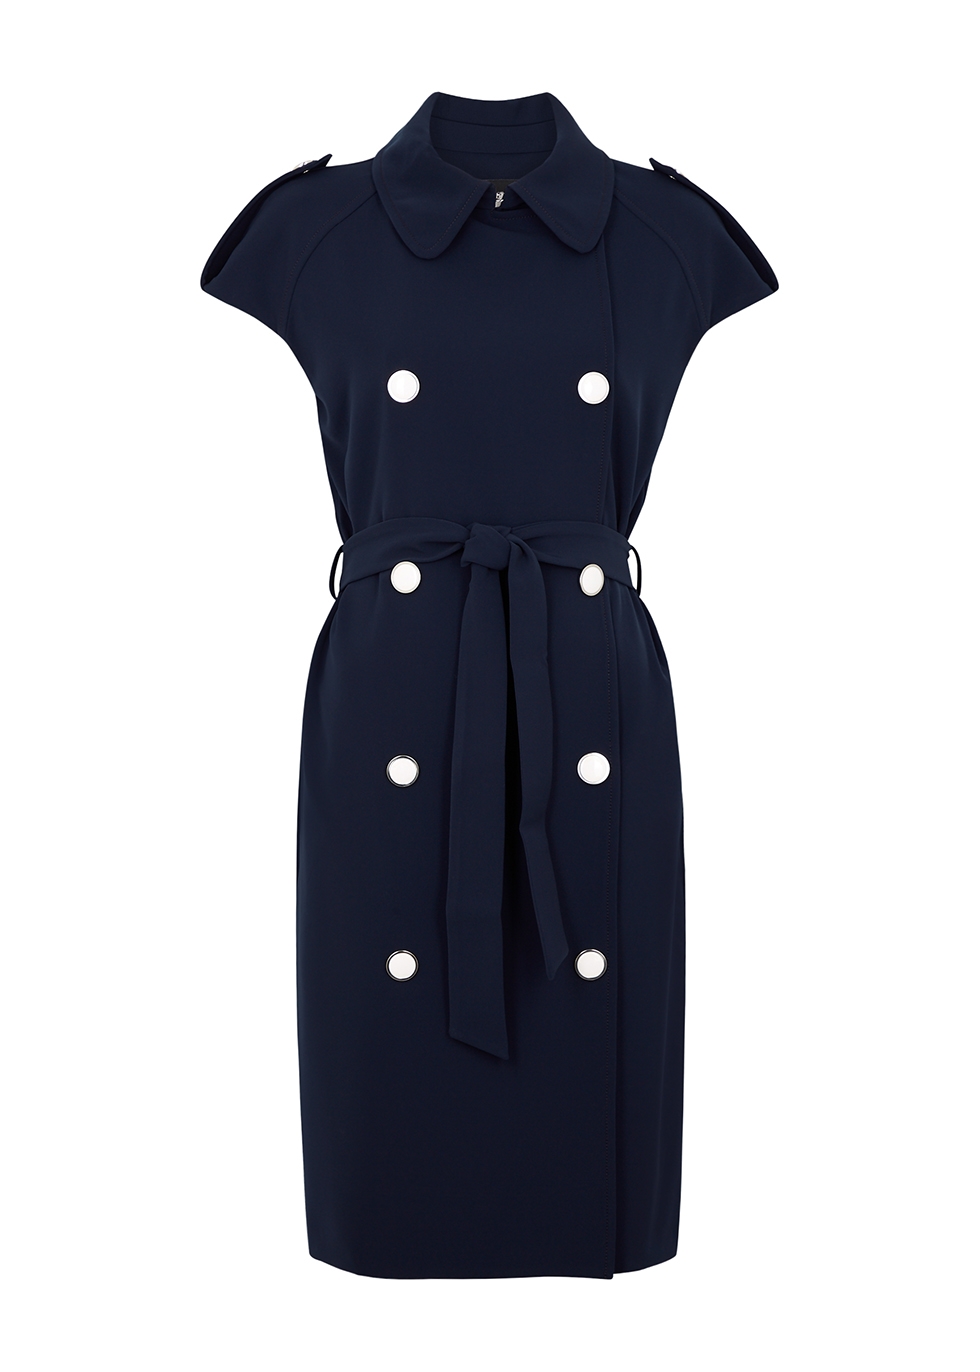 Boutique Moschino Navy double-breasted shirt dress - Harvey Nichols